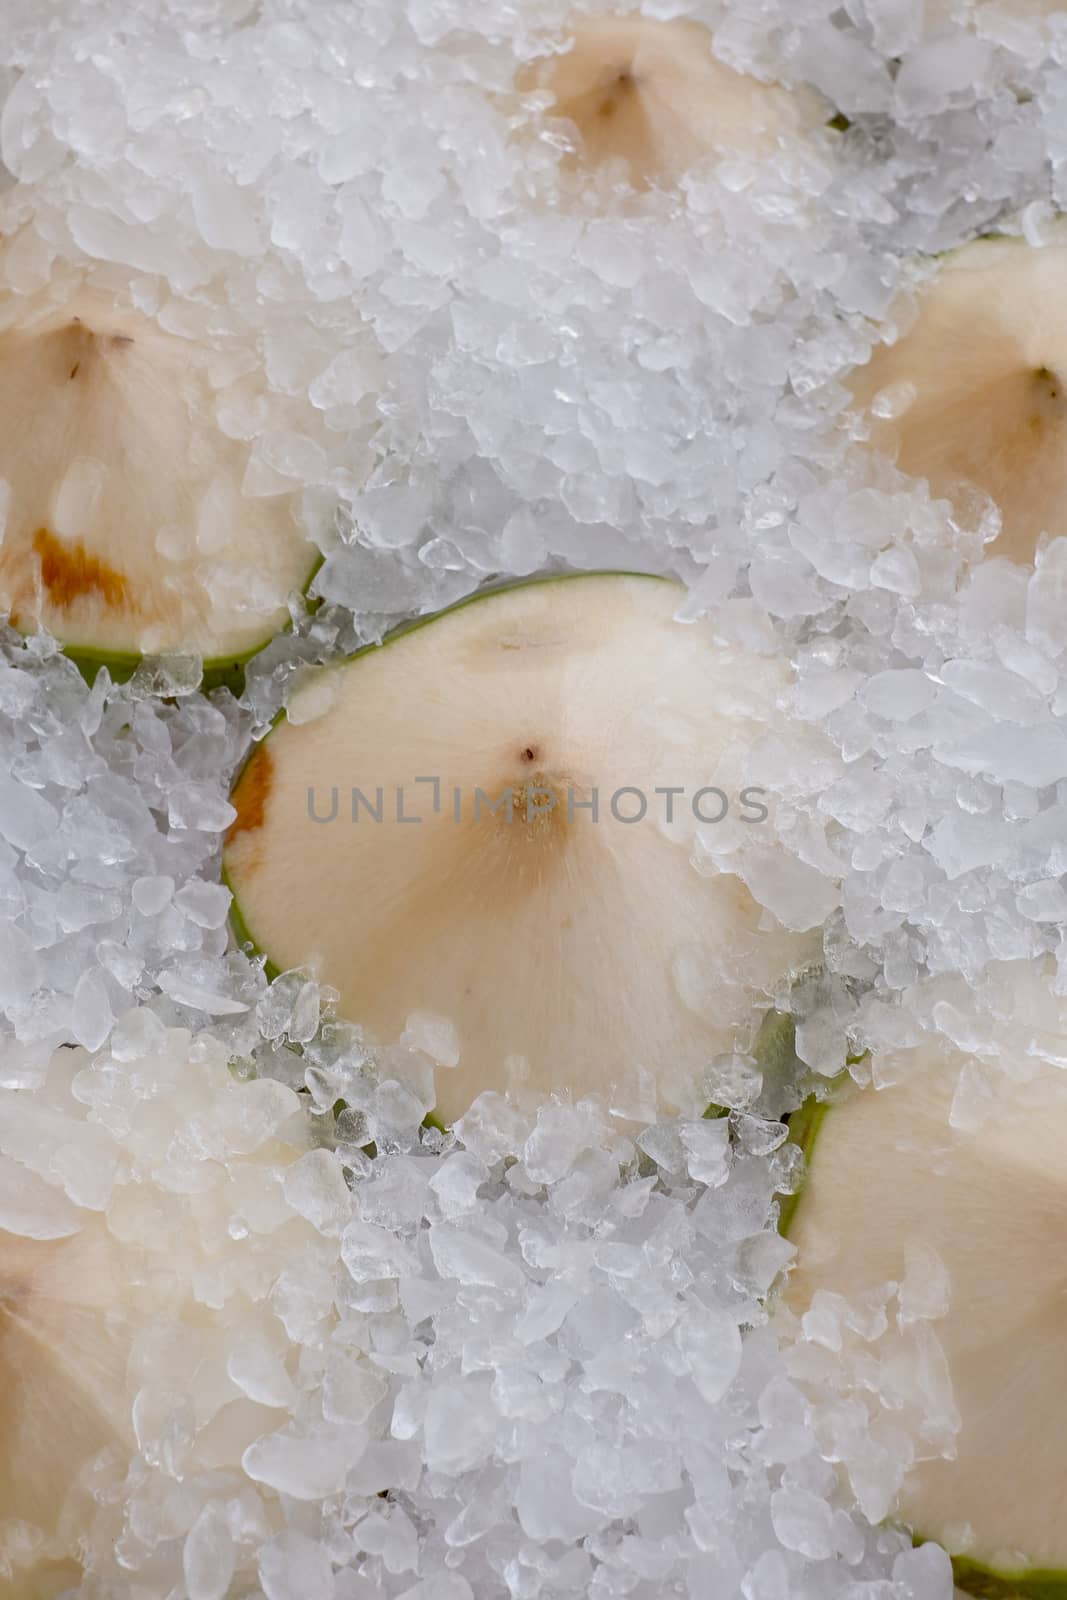 Cold Green coconuts in ice tank ready to drink by art9858